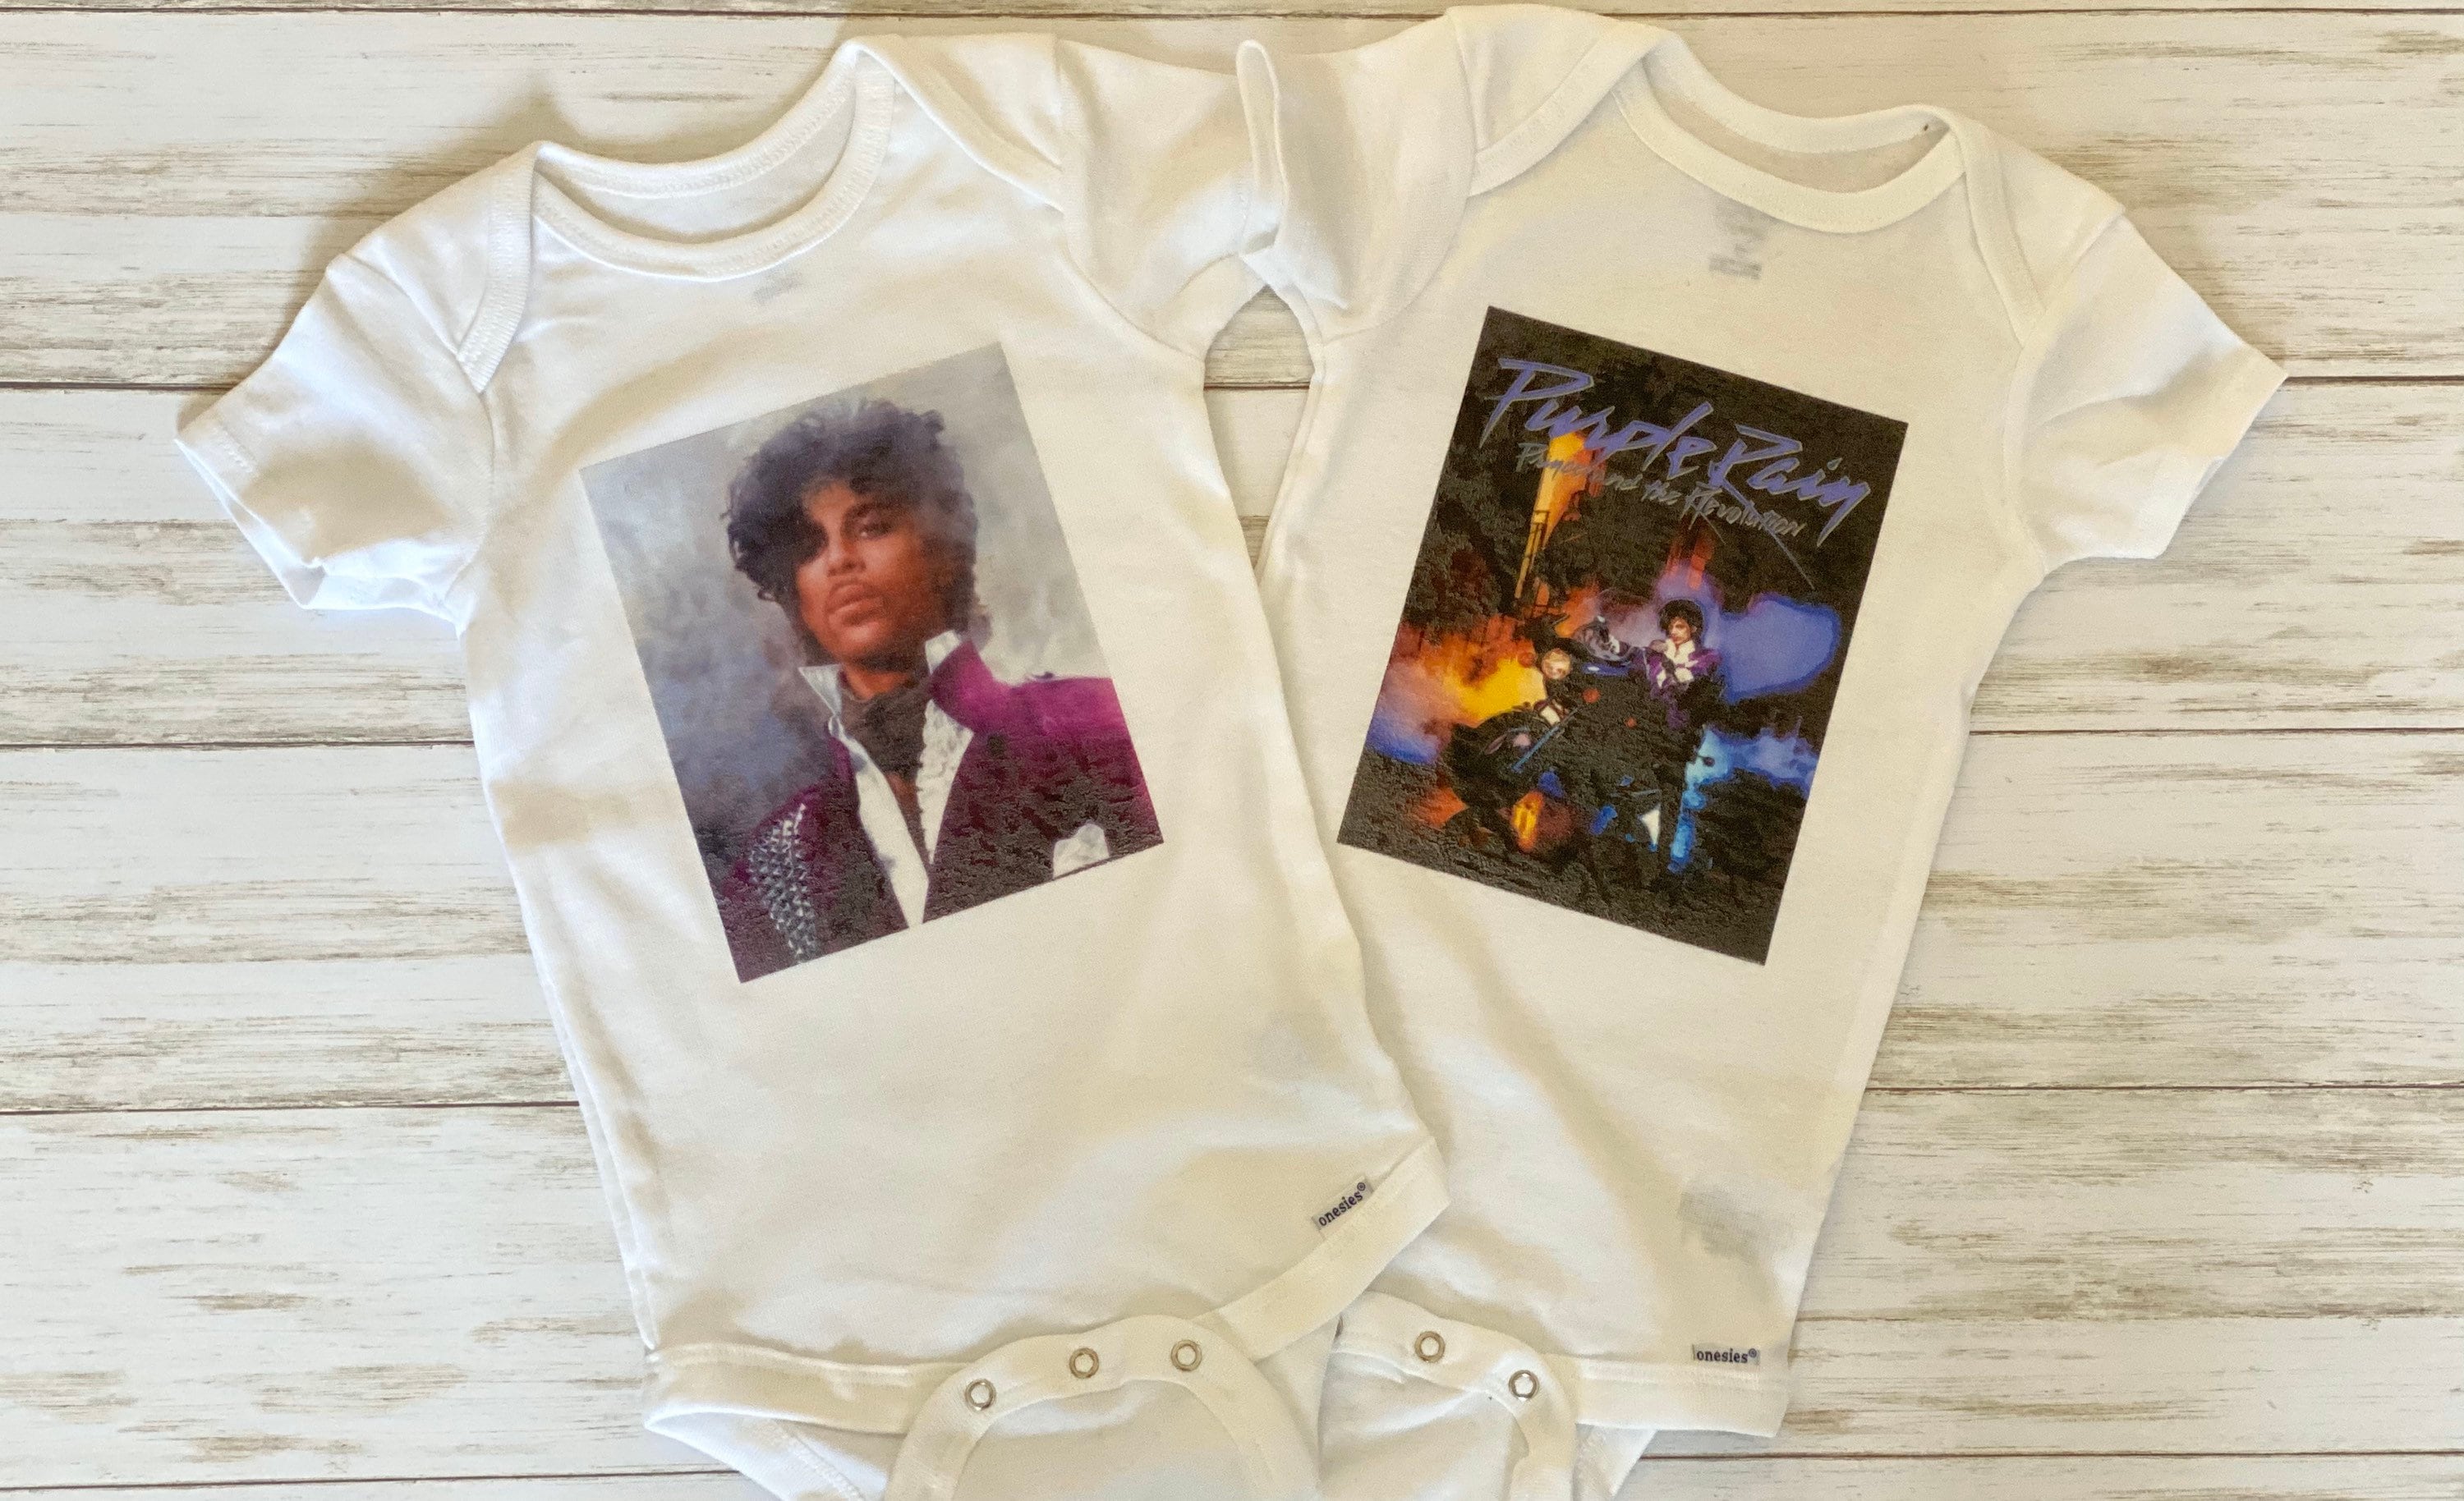 Prince Mateo Baby Jersey Short Sleeve Infant Tee